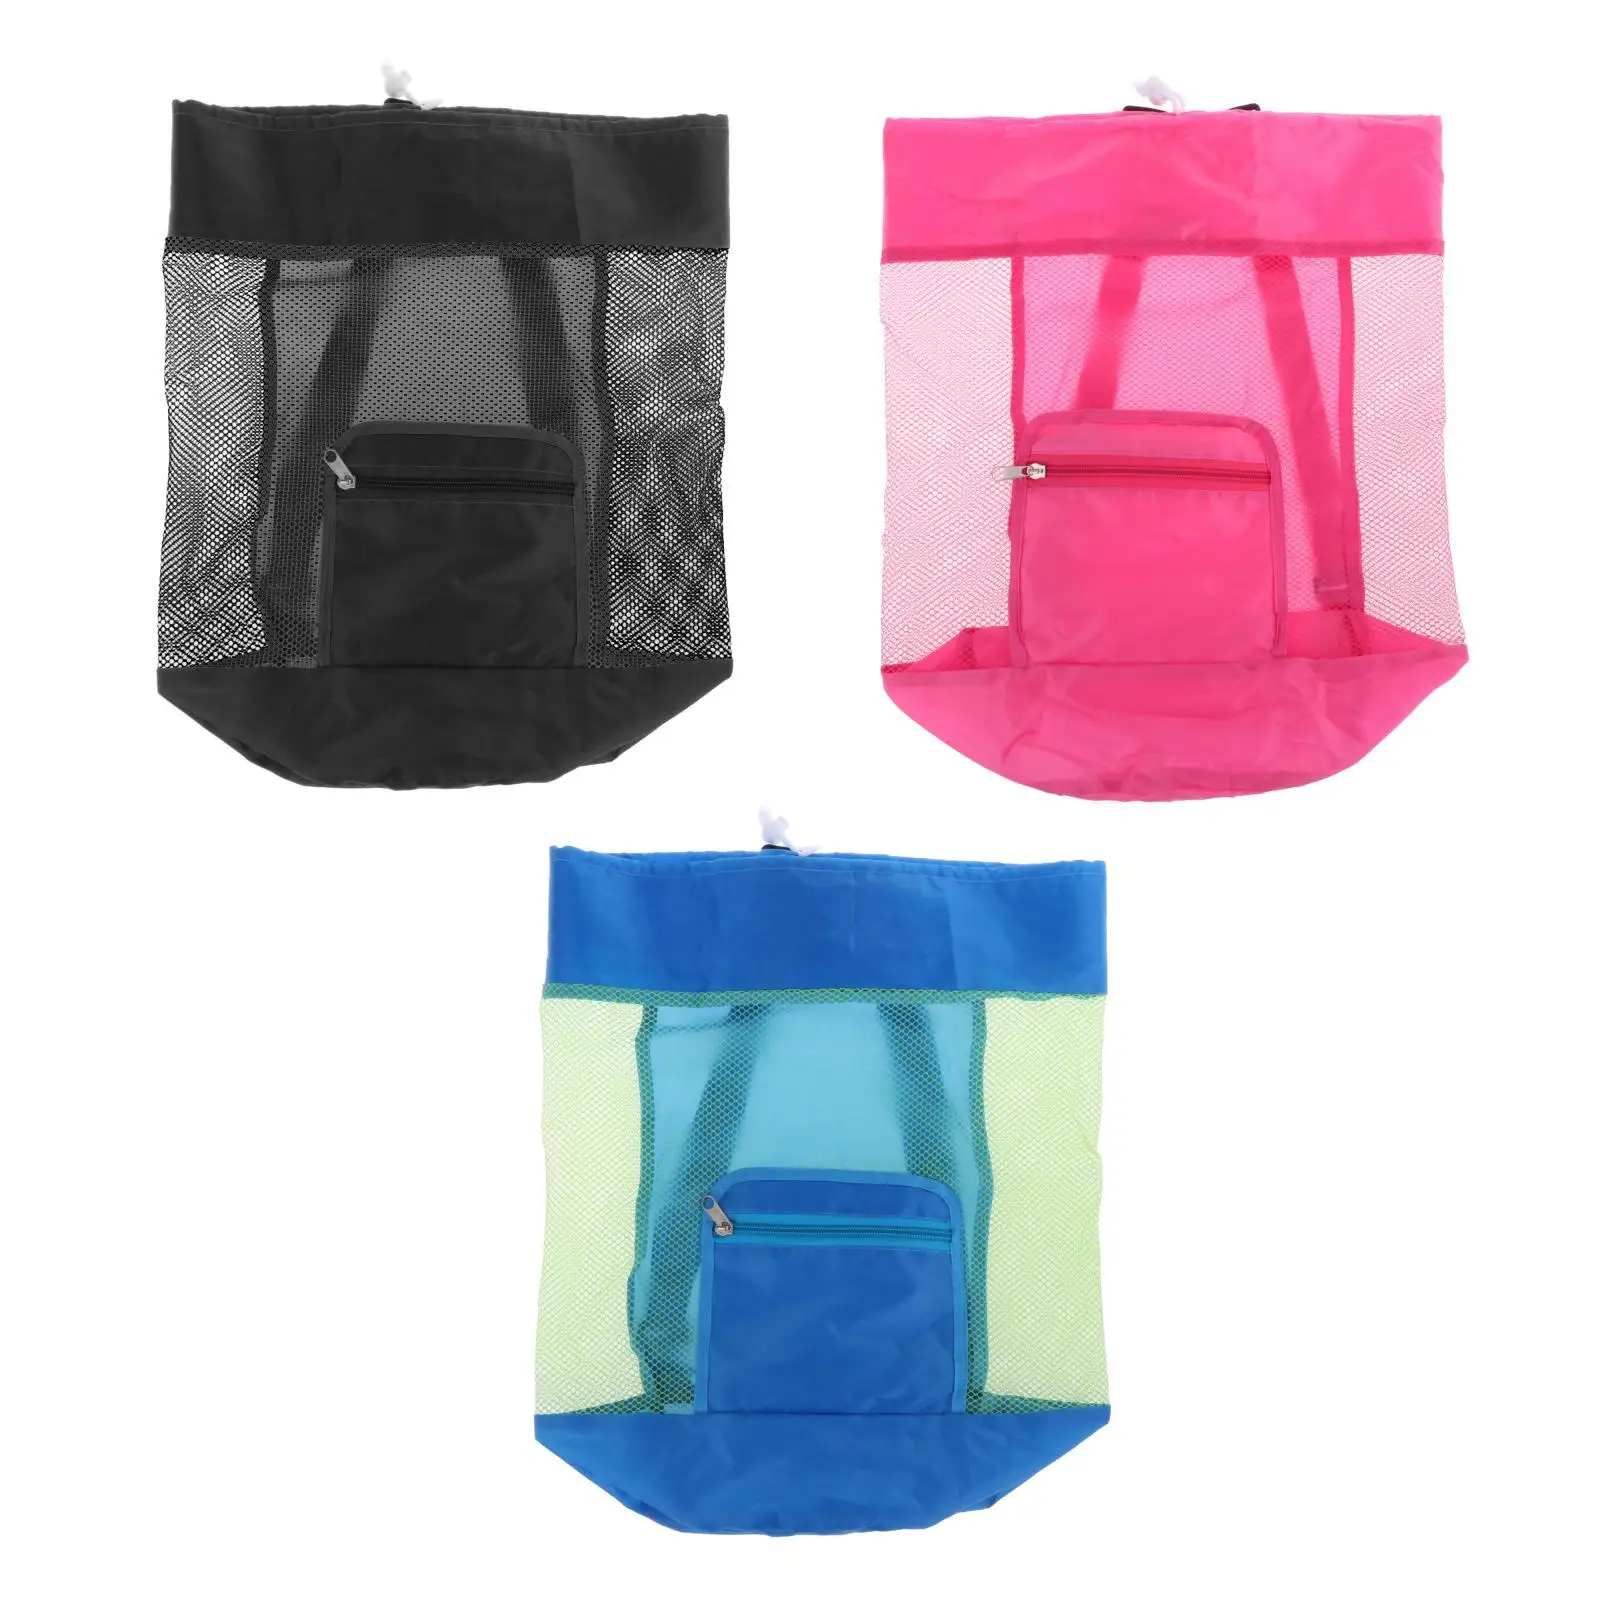 Beach Mesh Bag Storage Pouch Tote Sundries Organizers Kids Girls Beach Toy Bag for Swimming Travel Vacation Picnic Fittings